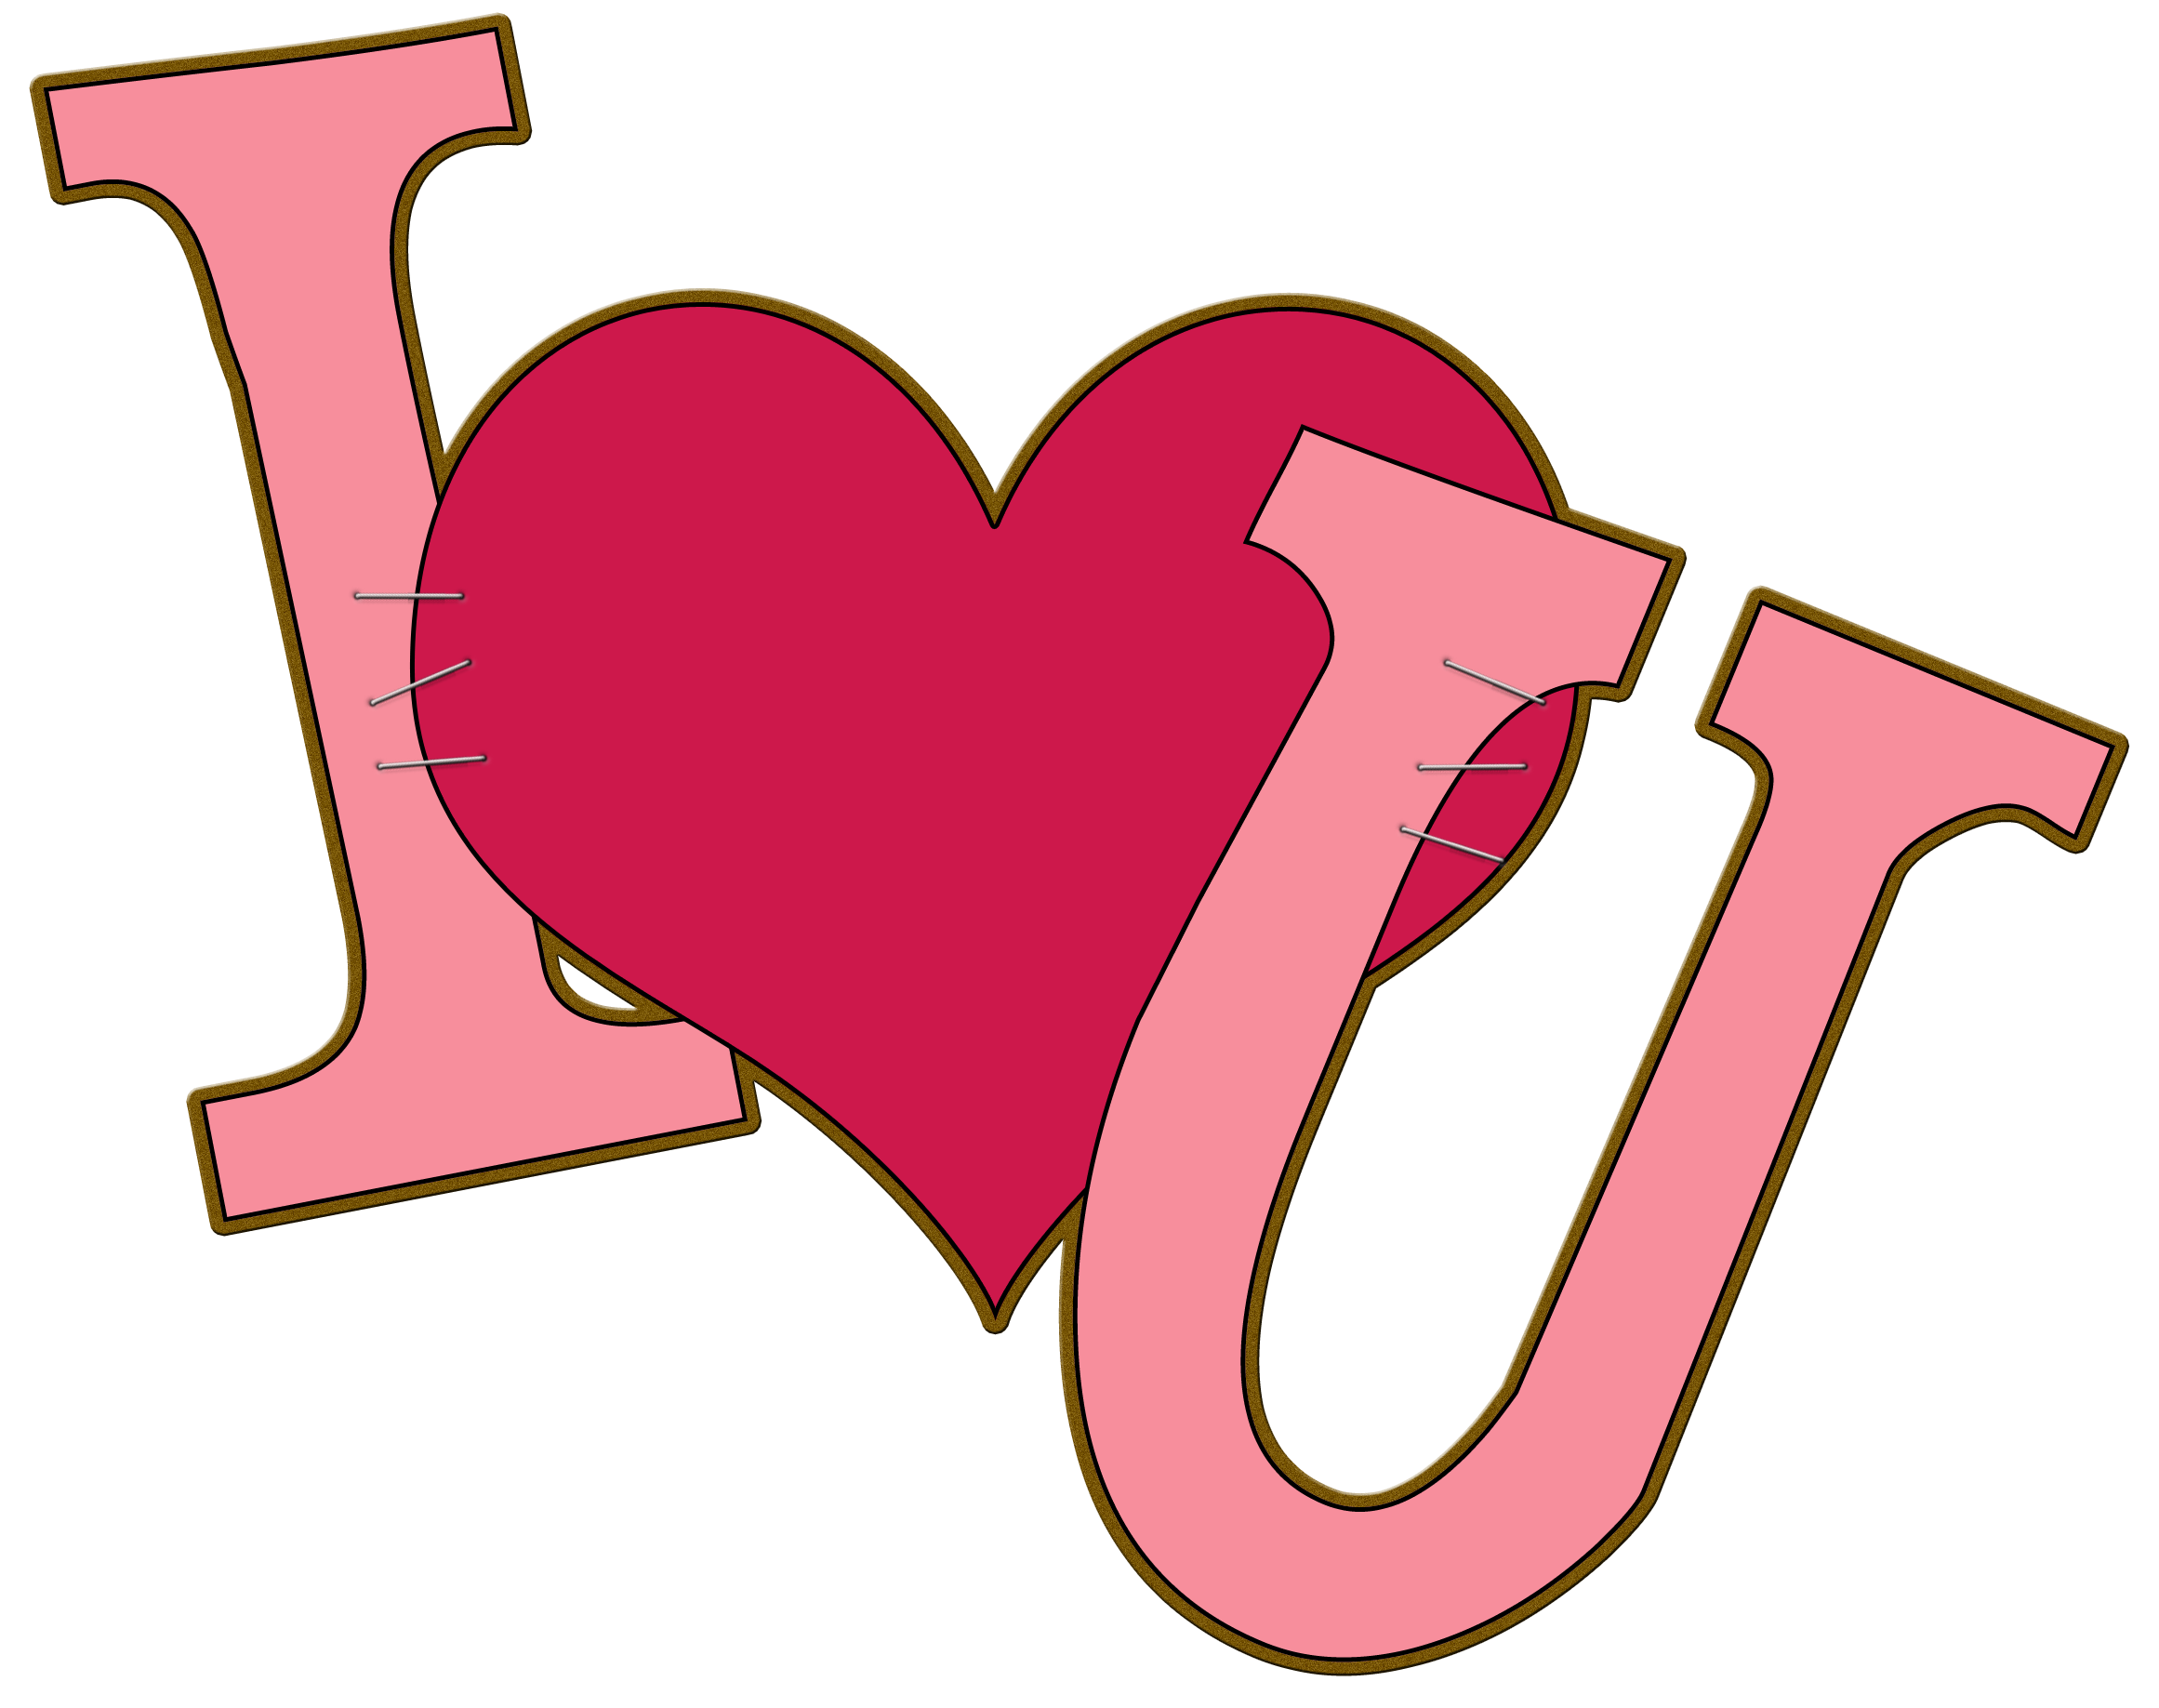 Love You Clipart   Clipart Panda   Free Clipart Images